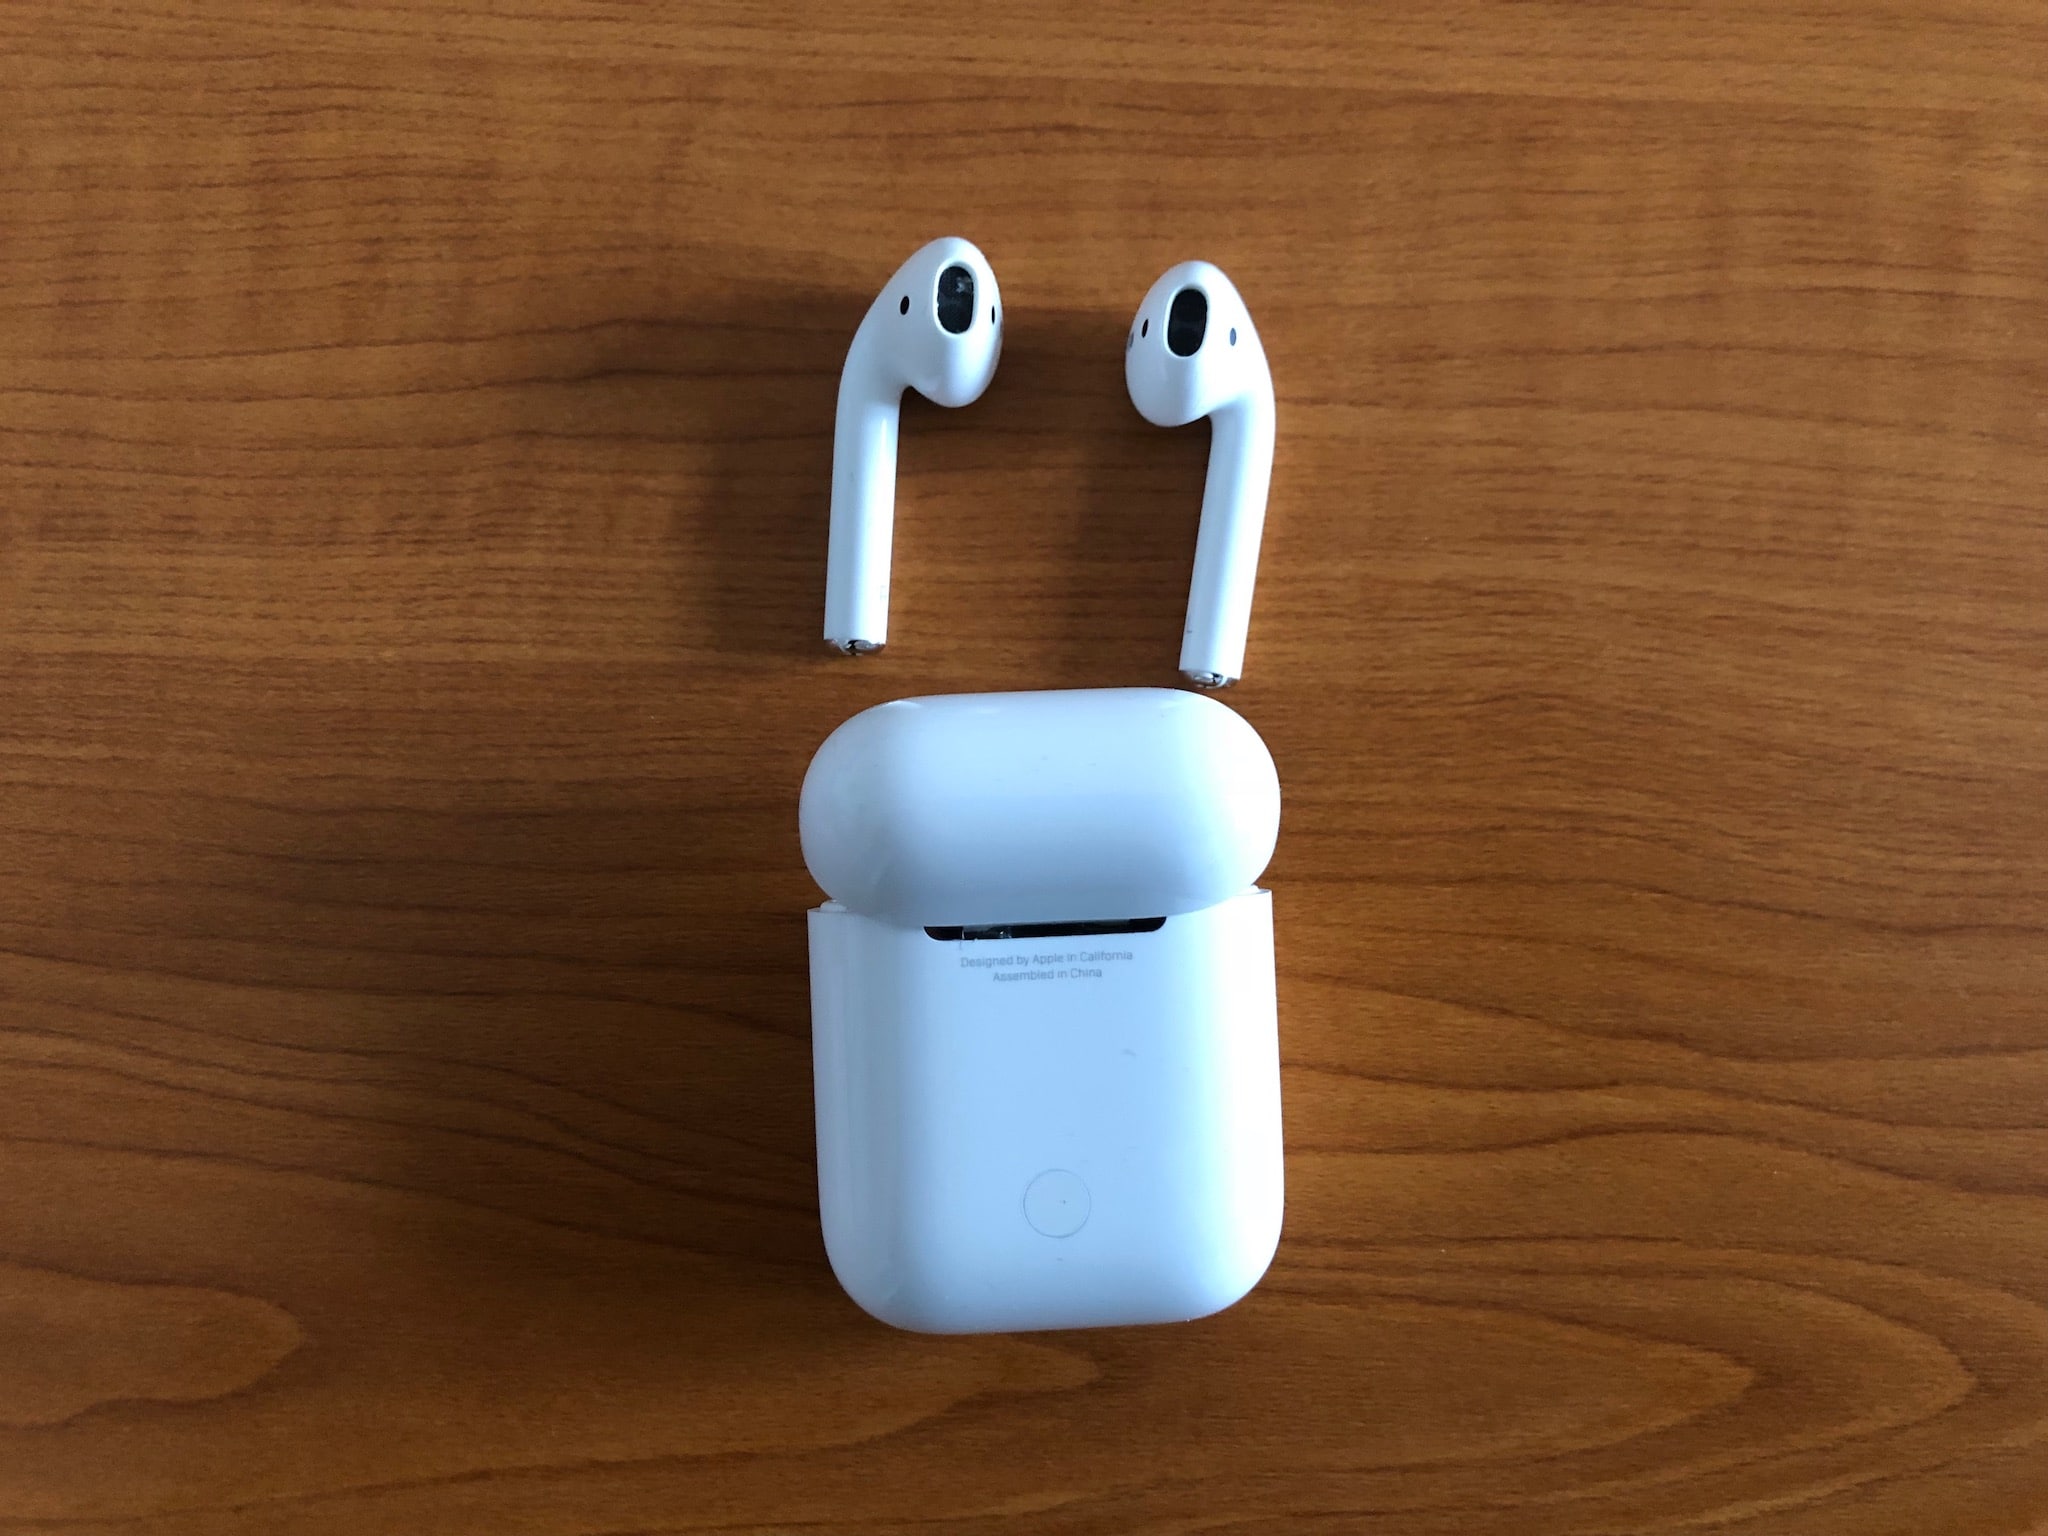 Review Apple AirPods